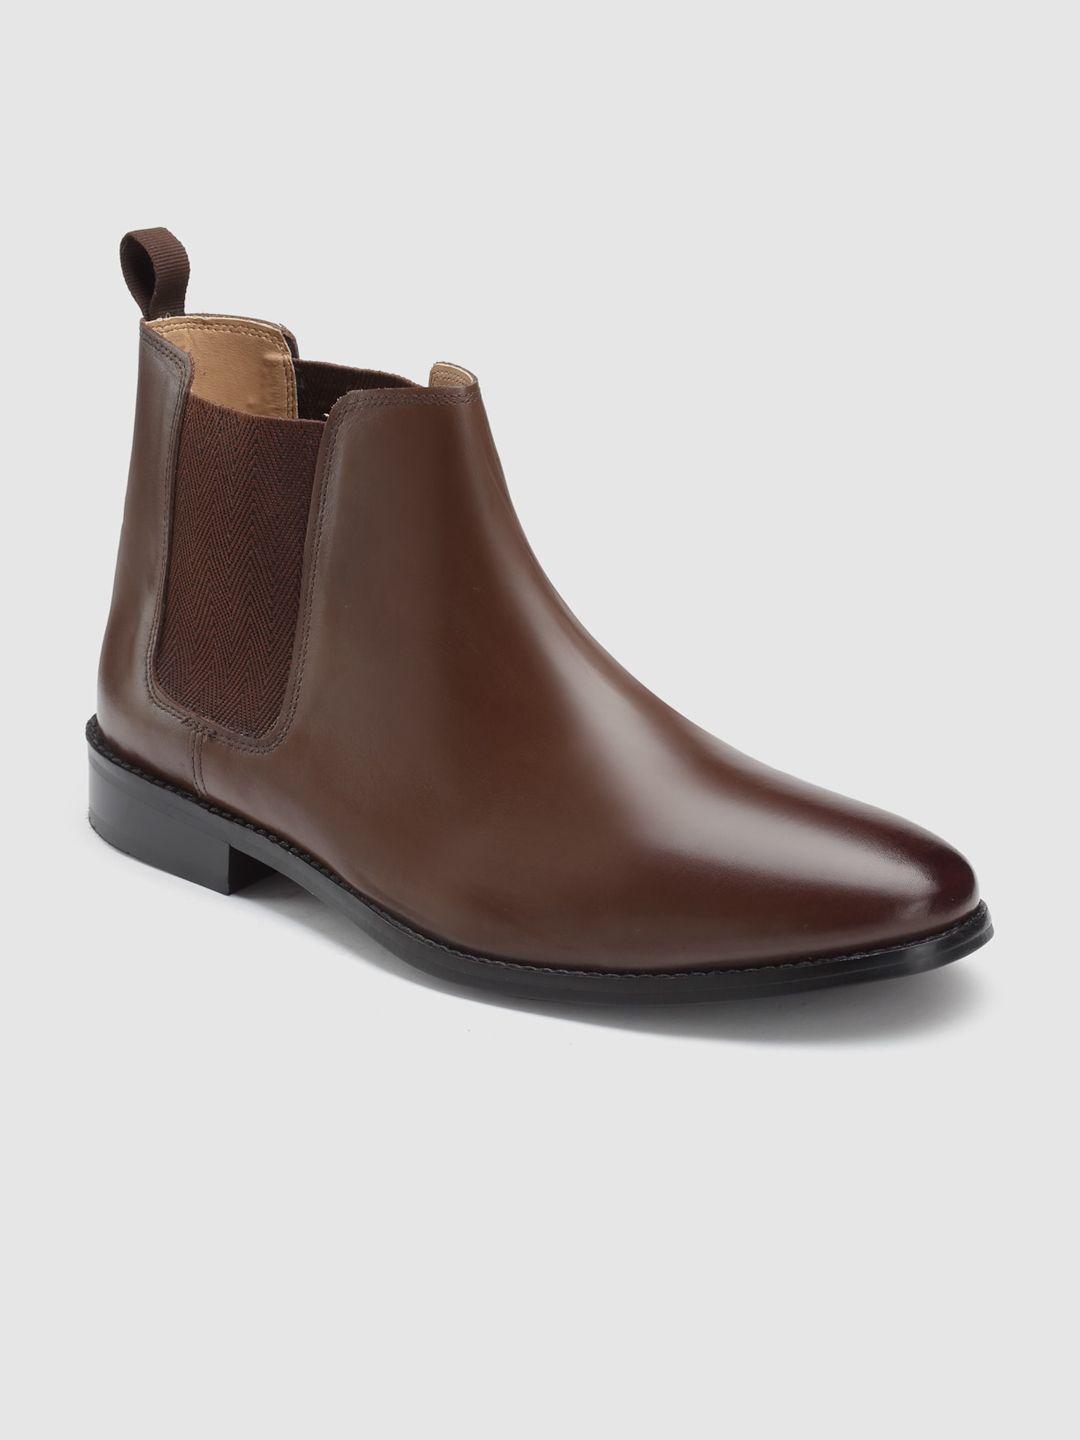 hats off accessories men mid top leather chelsea boots